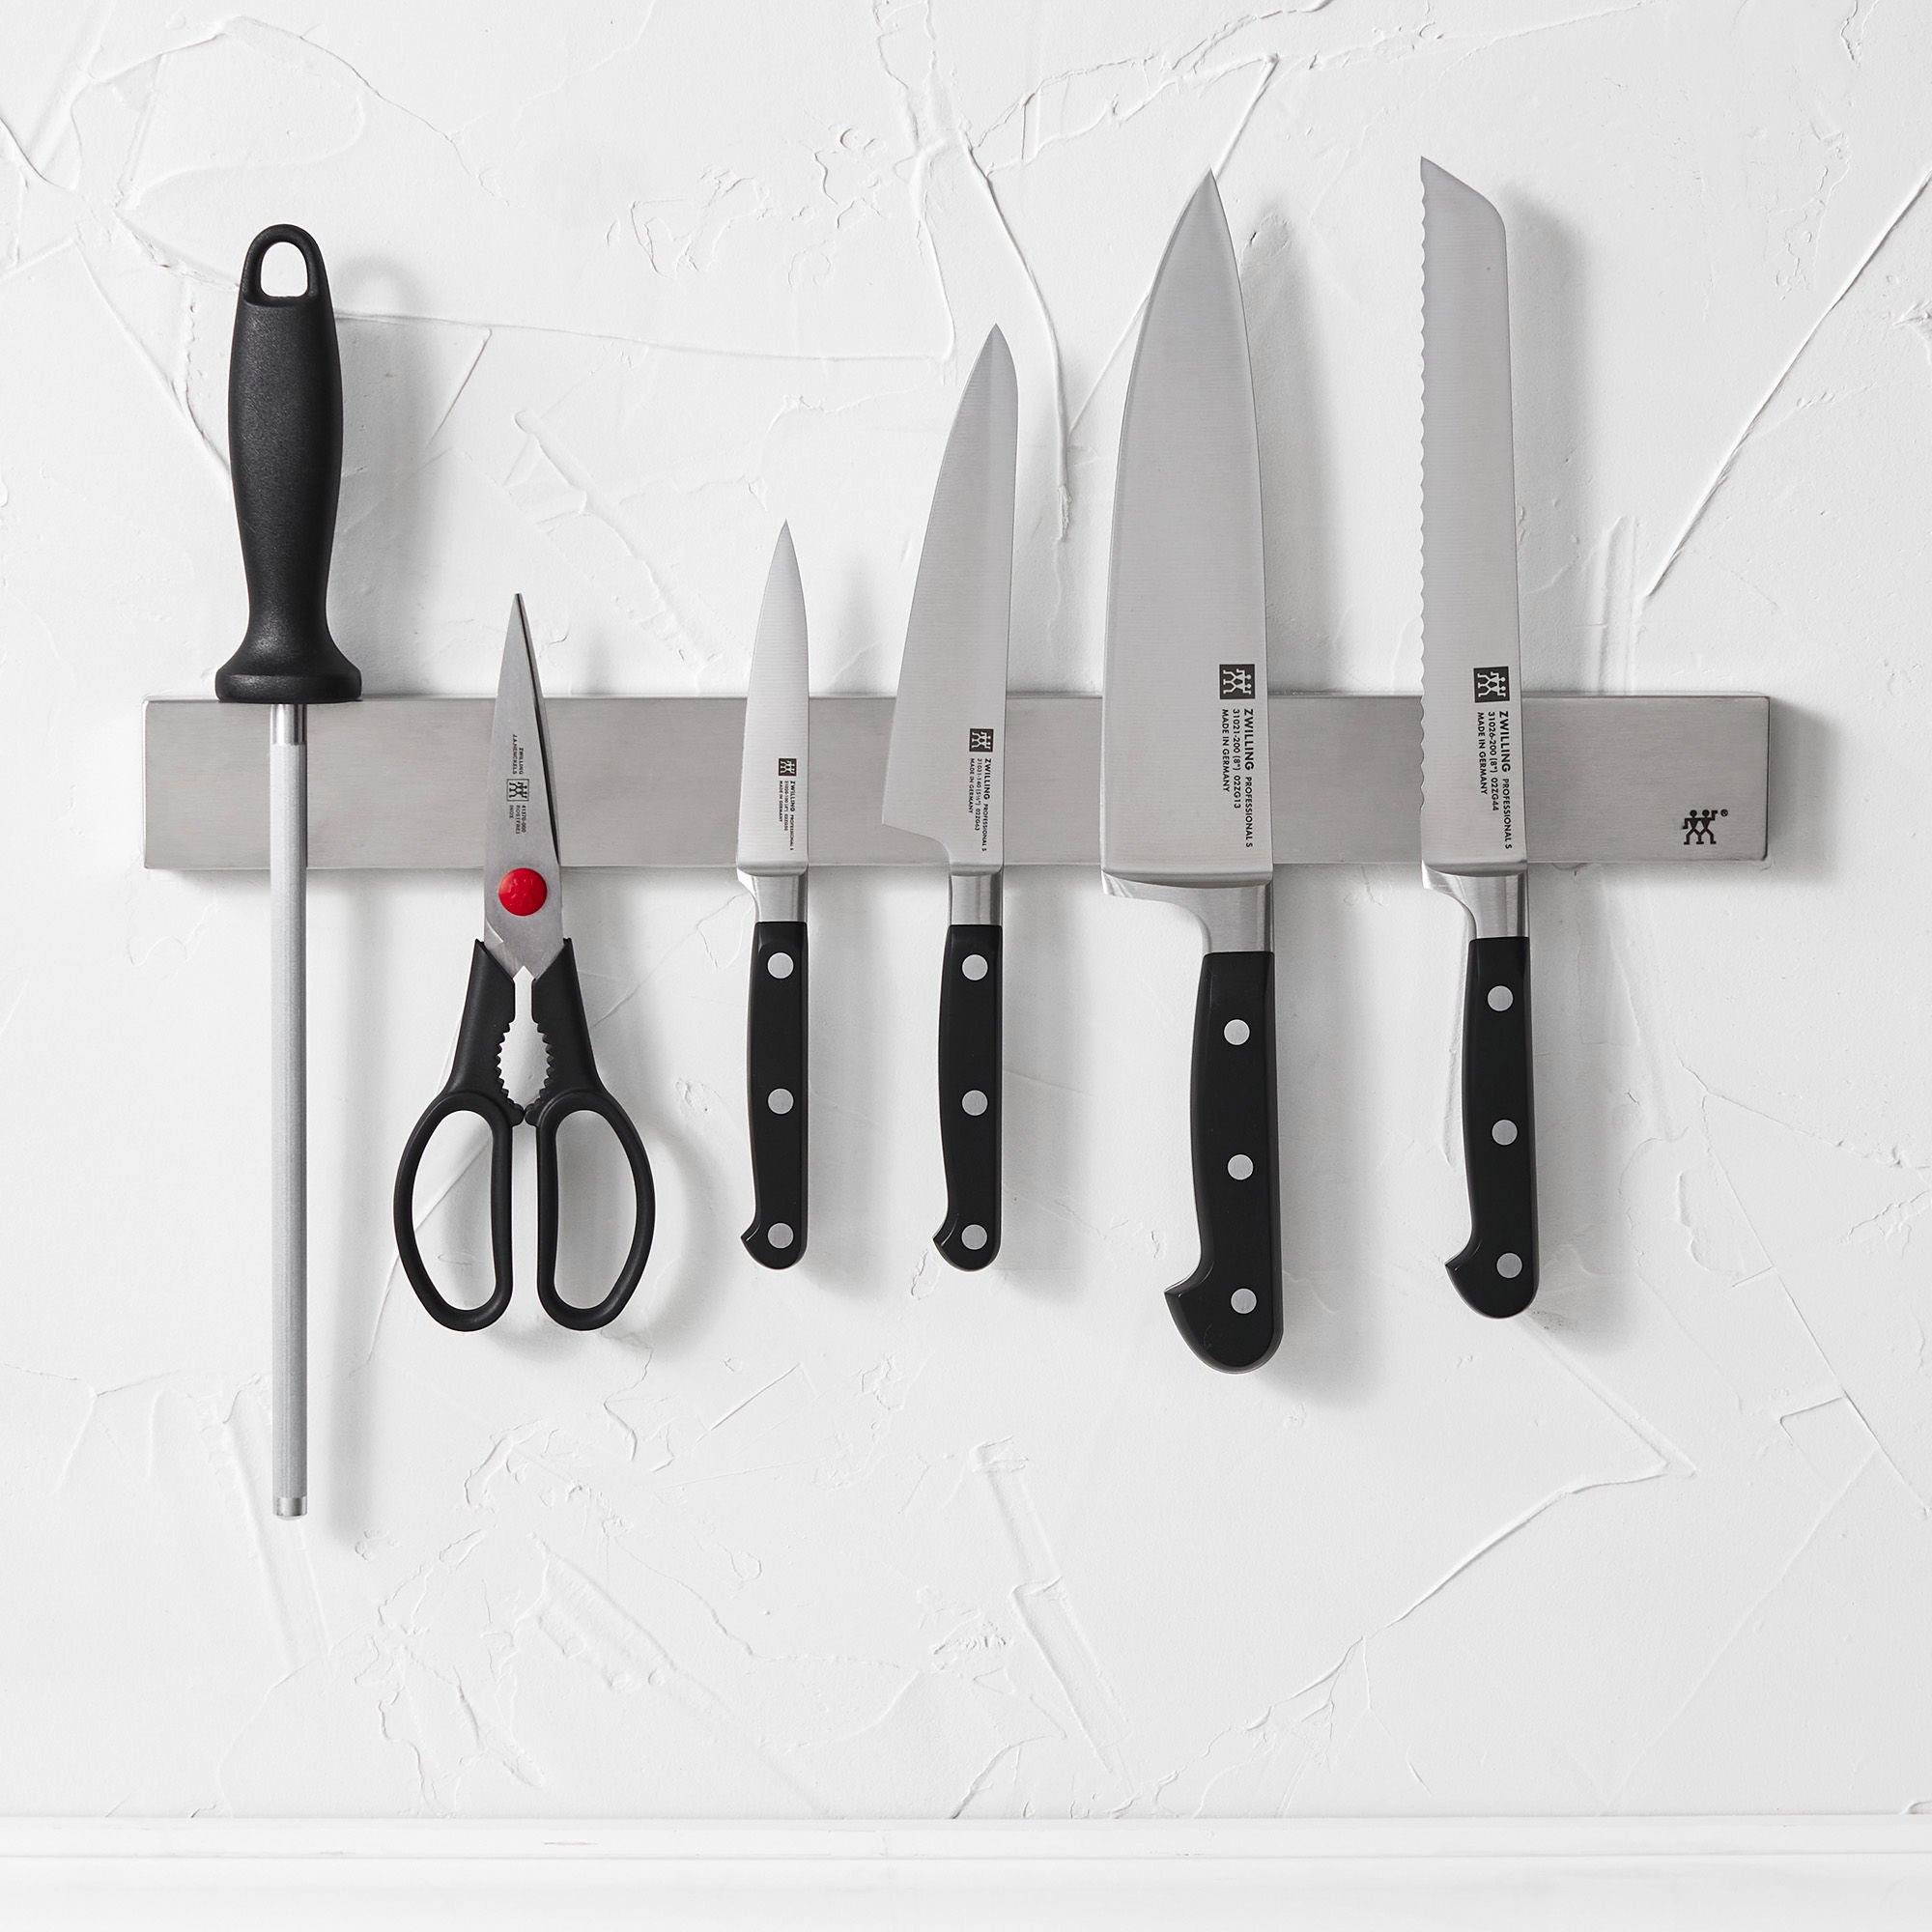 ZWILLING J.A. Henckels Gourmet 5-Piece White Canister Knife Set + Reviews